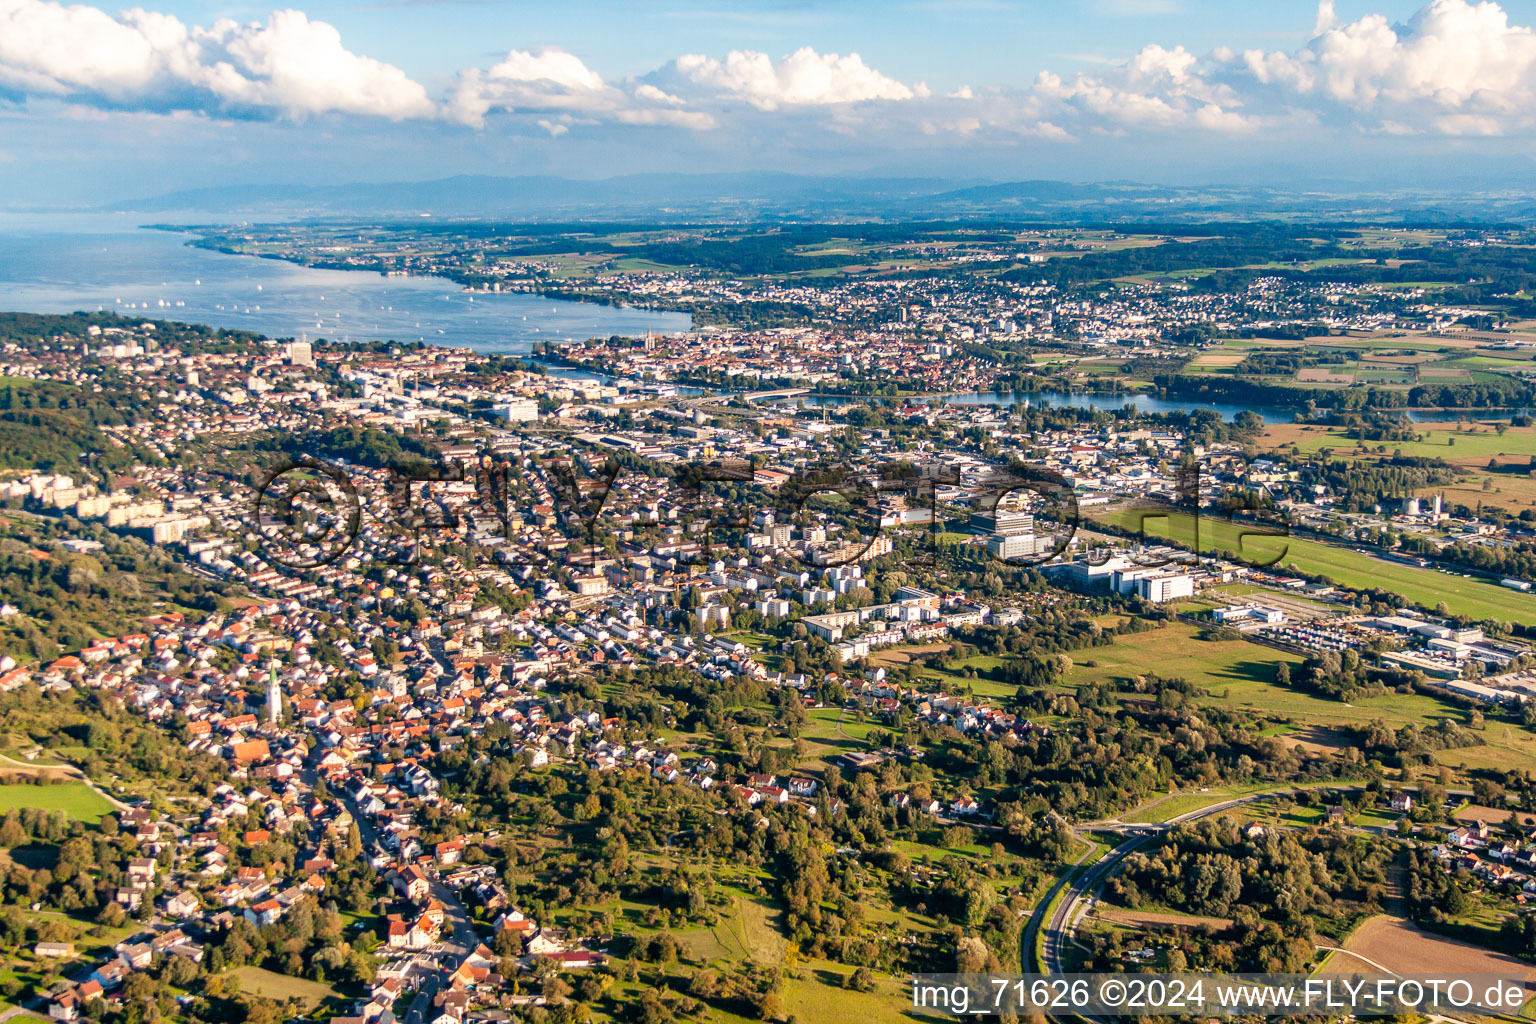 From northwest in the district Petershausen in Konstanz in the state Baden-Wuerttemberg, Germany